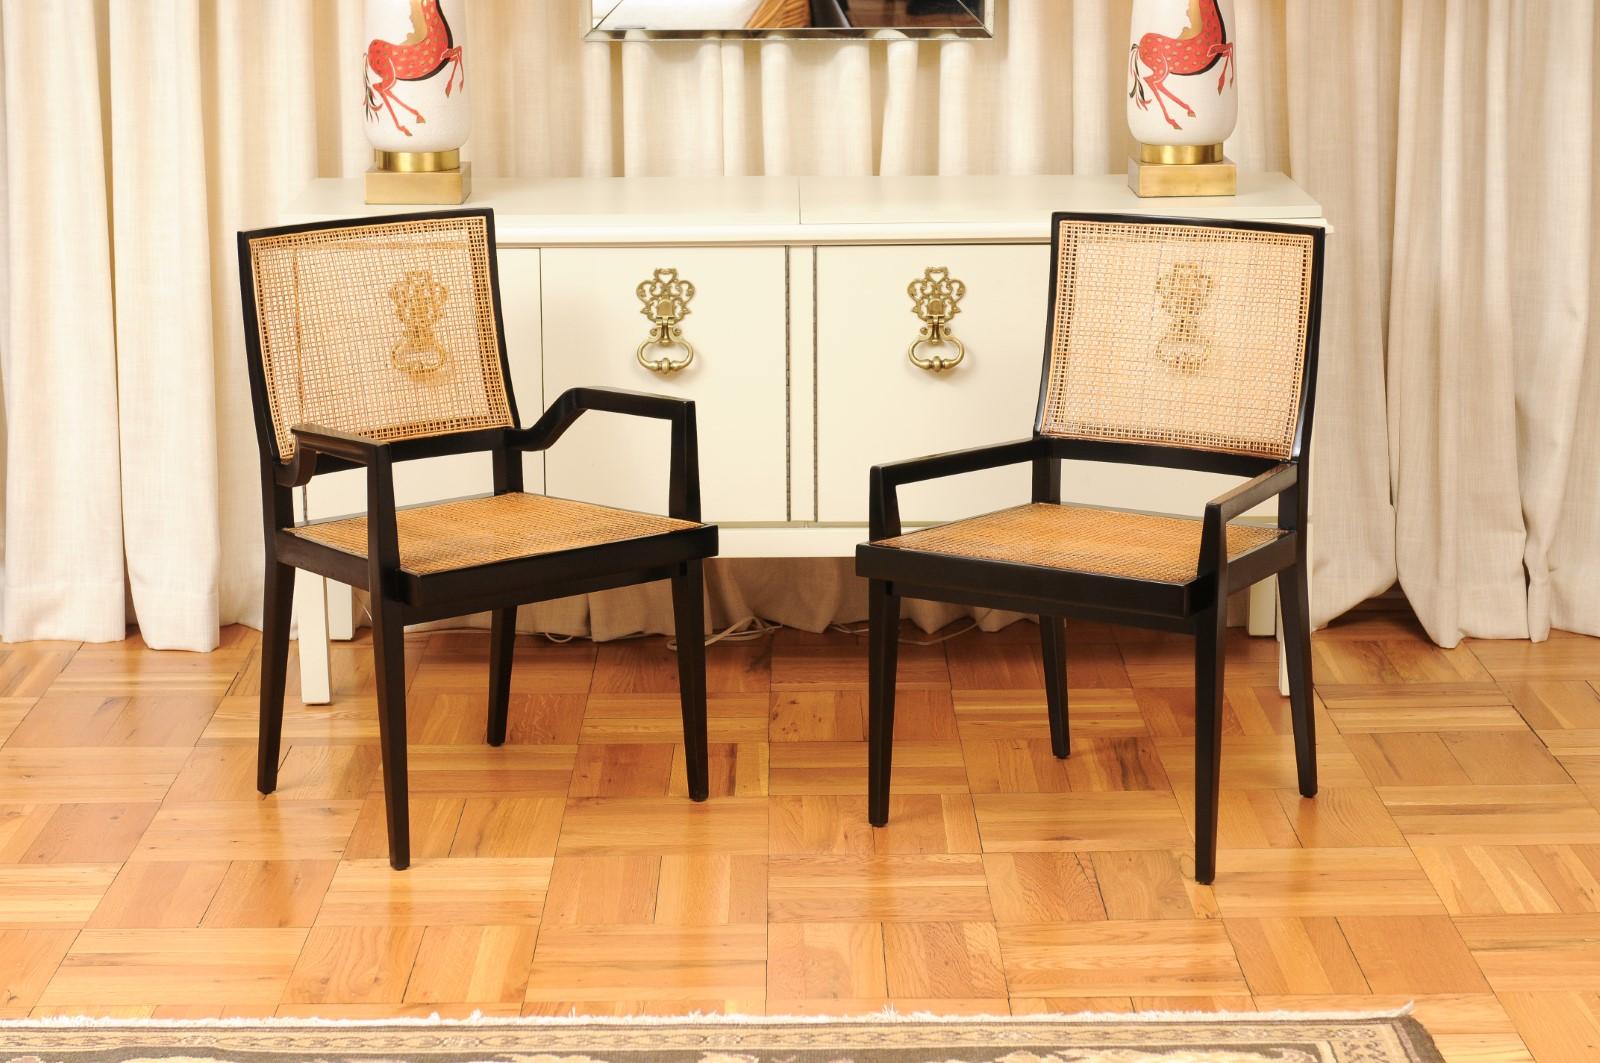 Spectacular Set of 20 Sleek Double Cane Dining Chairs by Michael Taylor For Sale 6